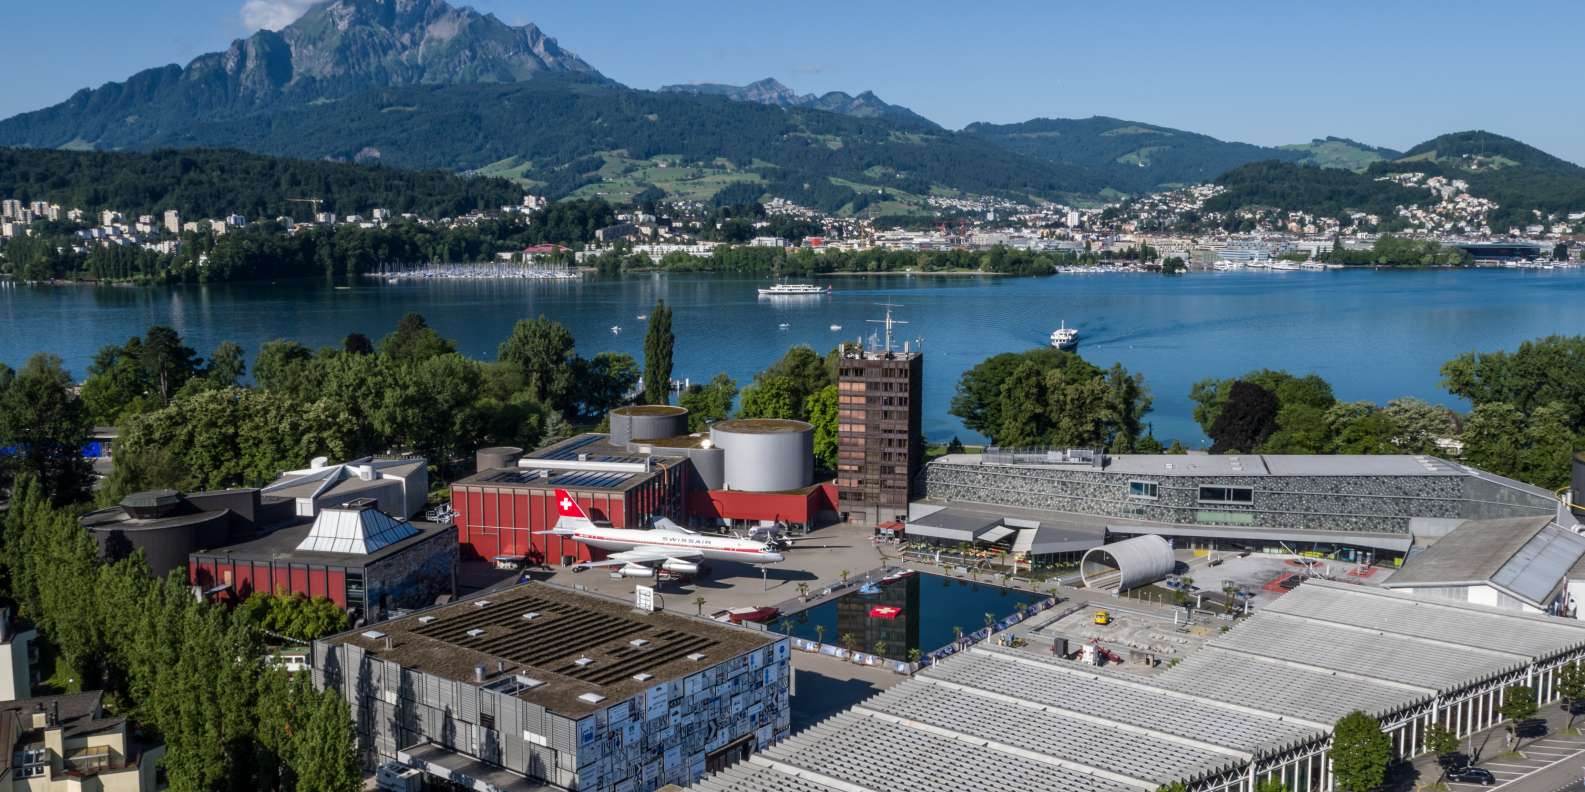 things to do in Lucerne